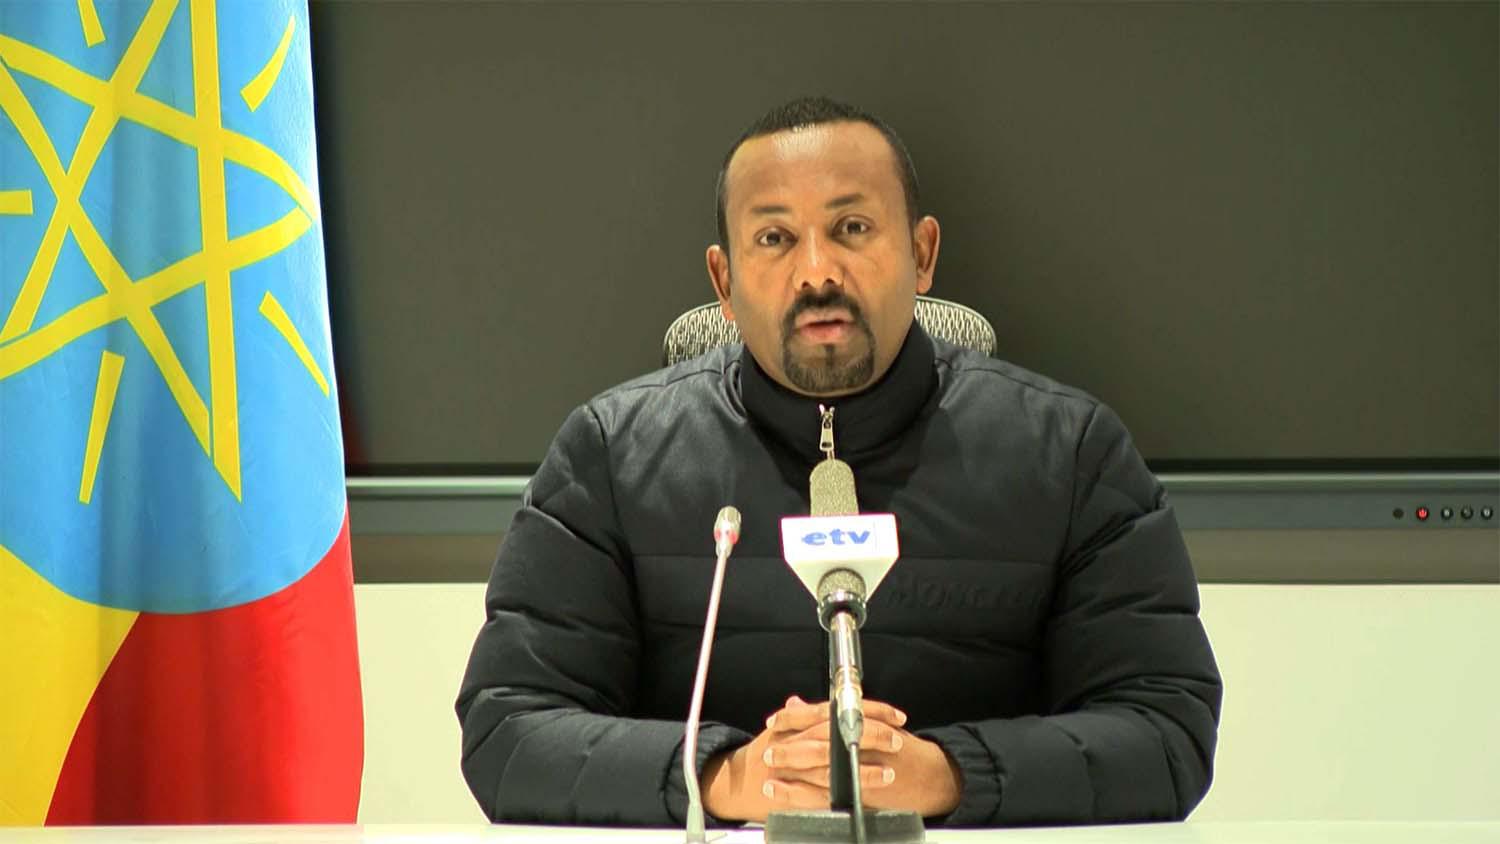 US Secretary of State Mike Pompeo appeared to back Ethiopia’s PM Abiy Ahmed